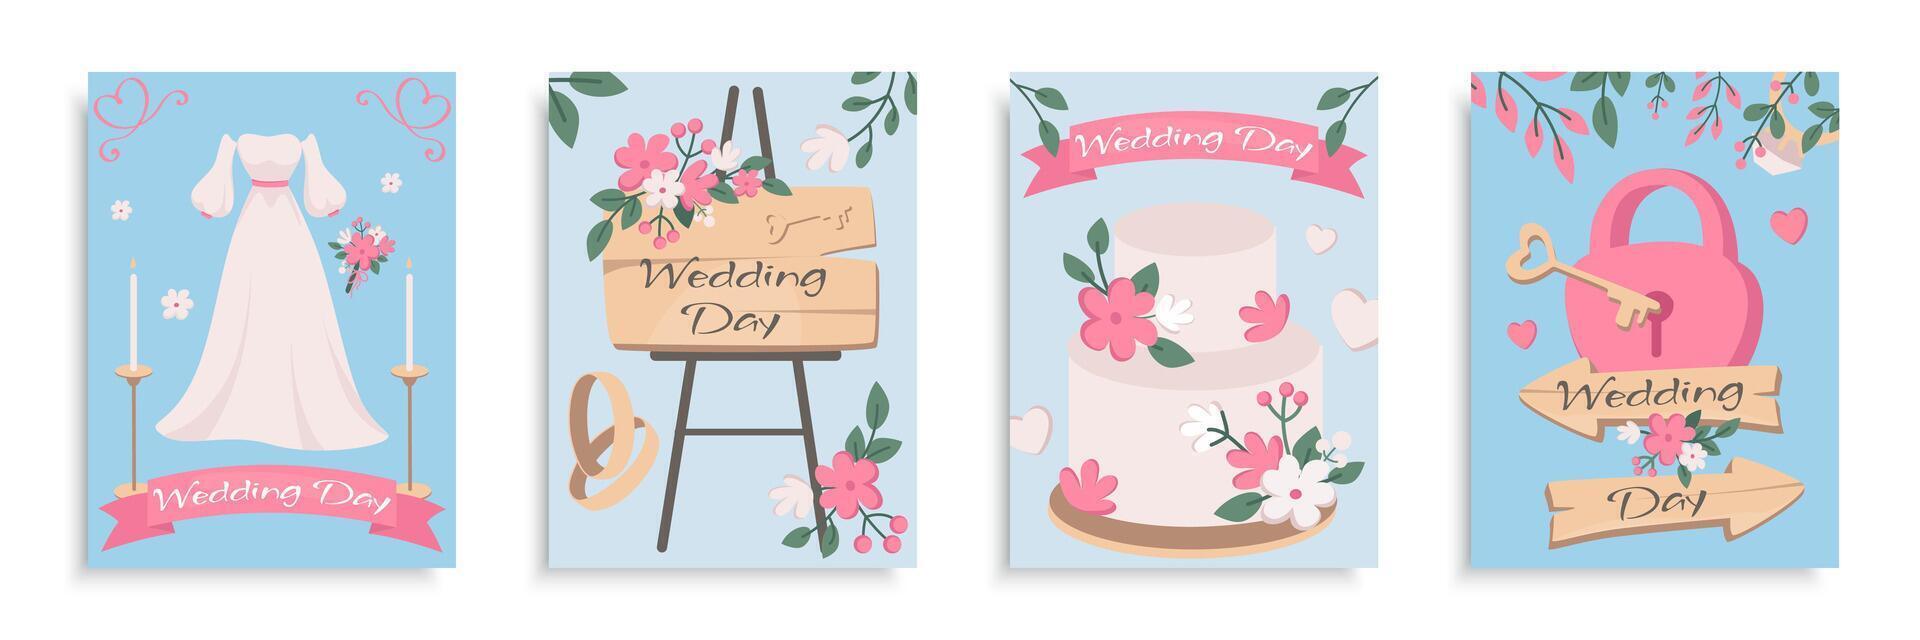 Wedding cover brochure set in flat design. Poster templates with white bride dress, candles, bouquet, pink flowers, wooden signs, rings, festive cake, heart padlock with key. Vector illustration.